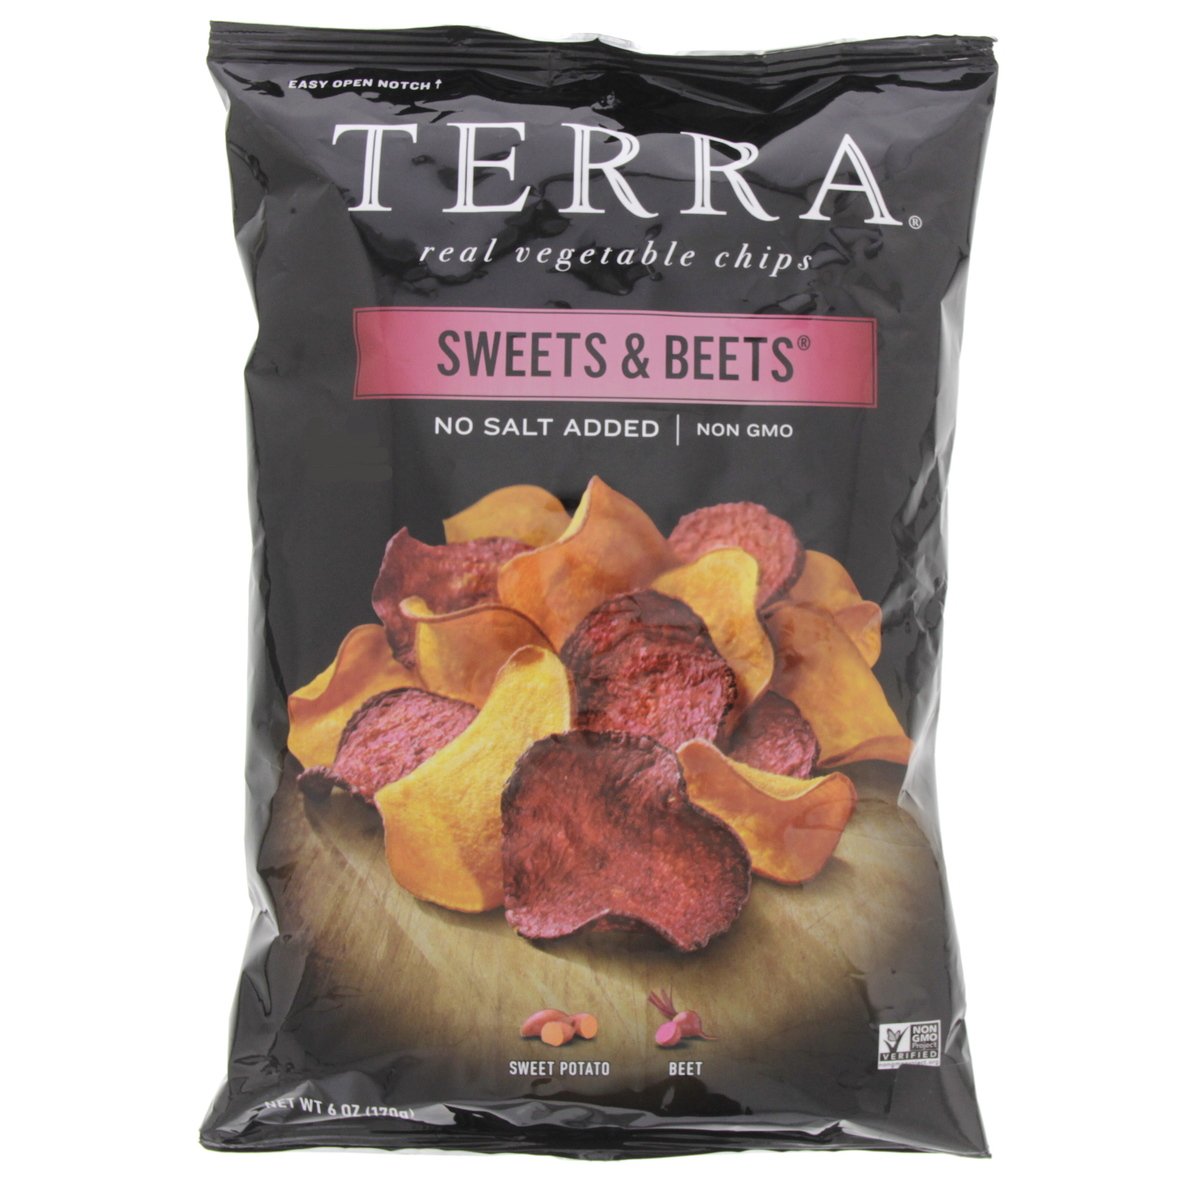 Terra Vegetable Chips Sweets & Beets 170 g